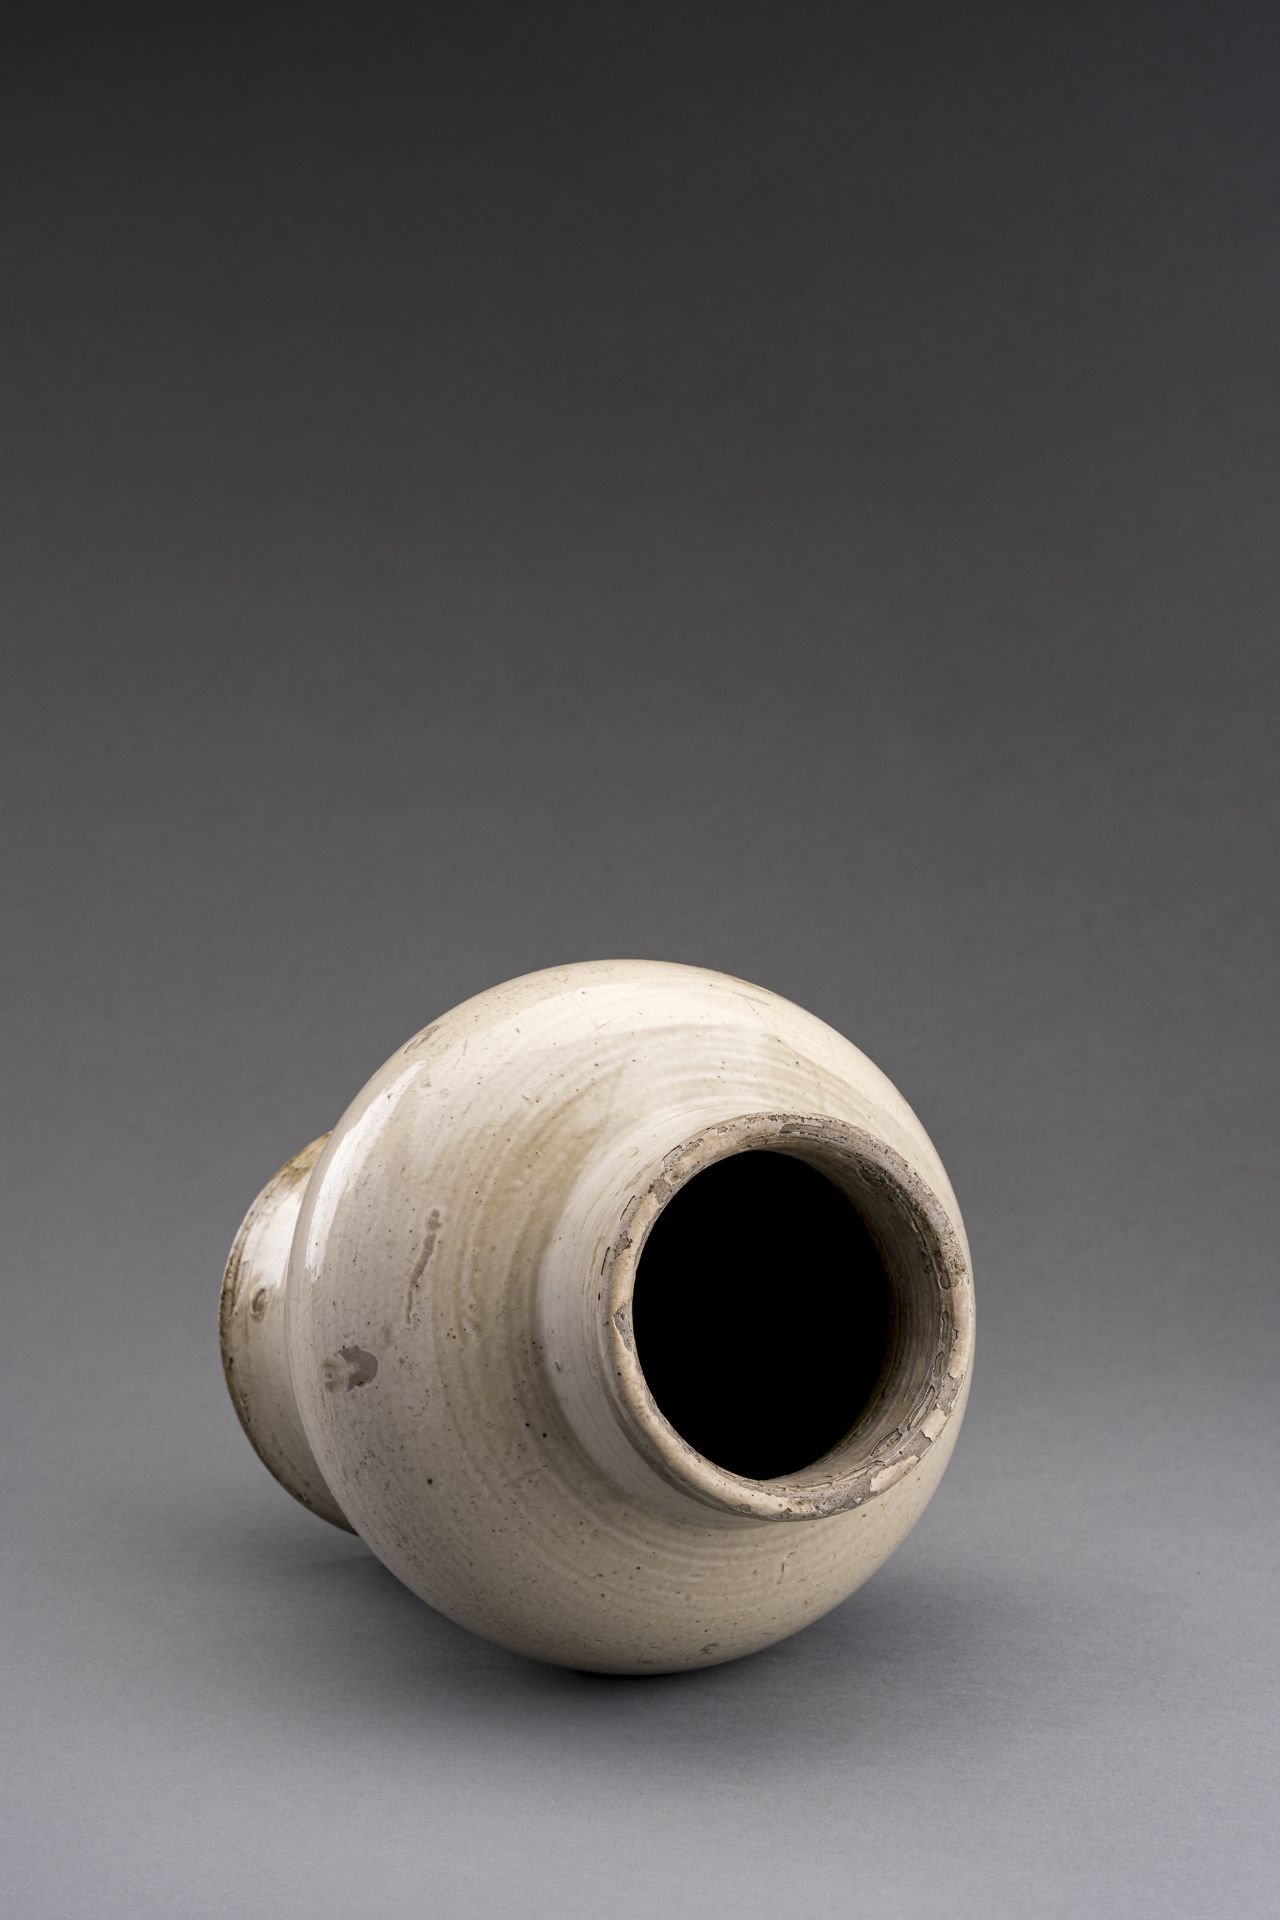 A CREAM GLAZED CERAMIC JAR, SONG TO YUAN DYNASTY - Image 5 of 6